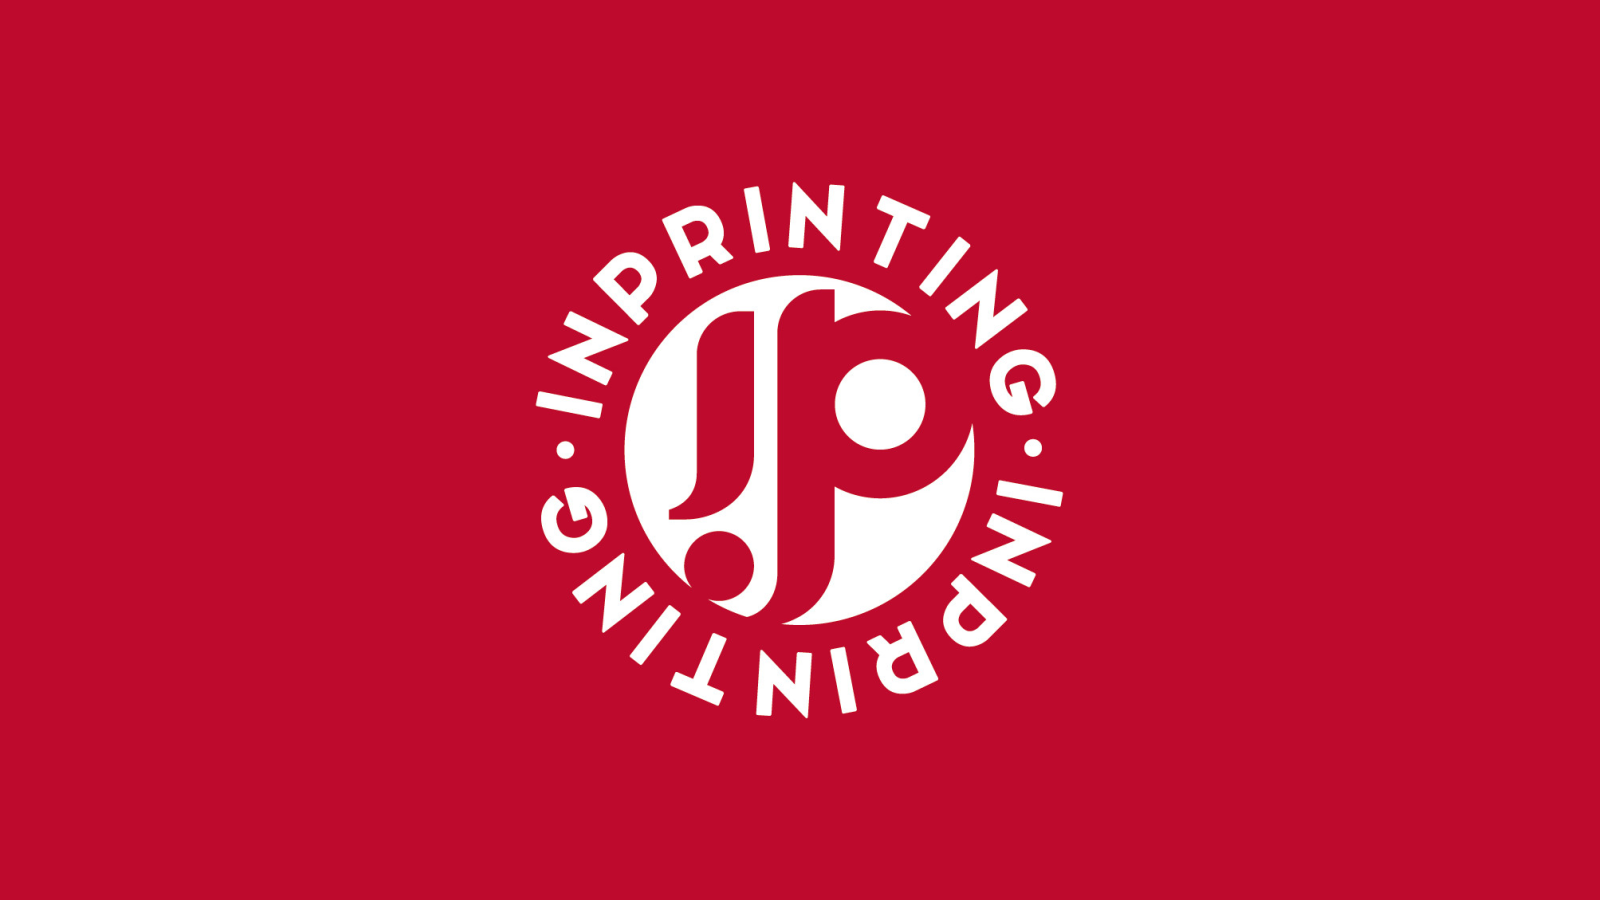 Inprinting - CustomizedProducts